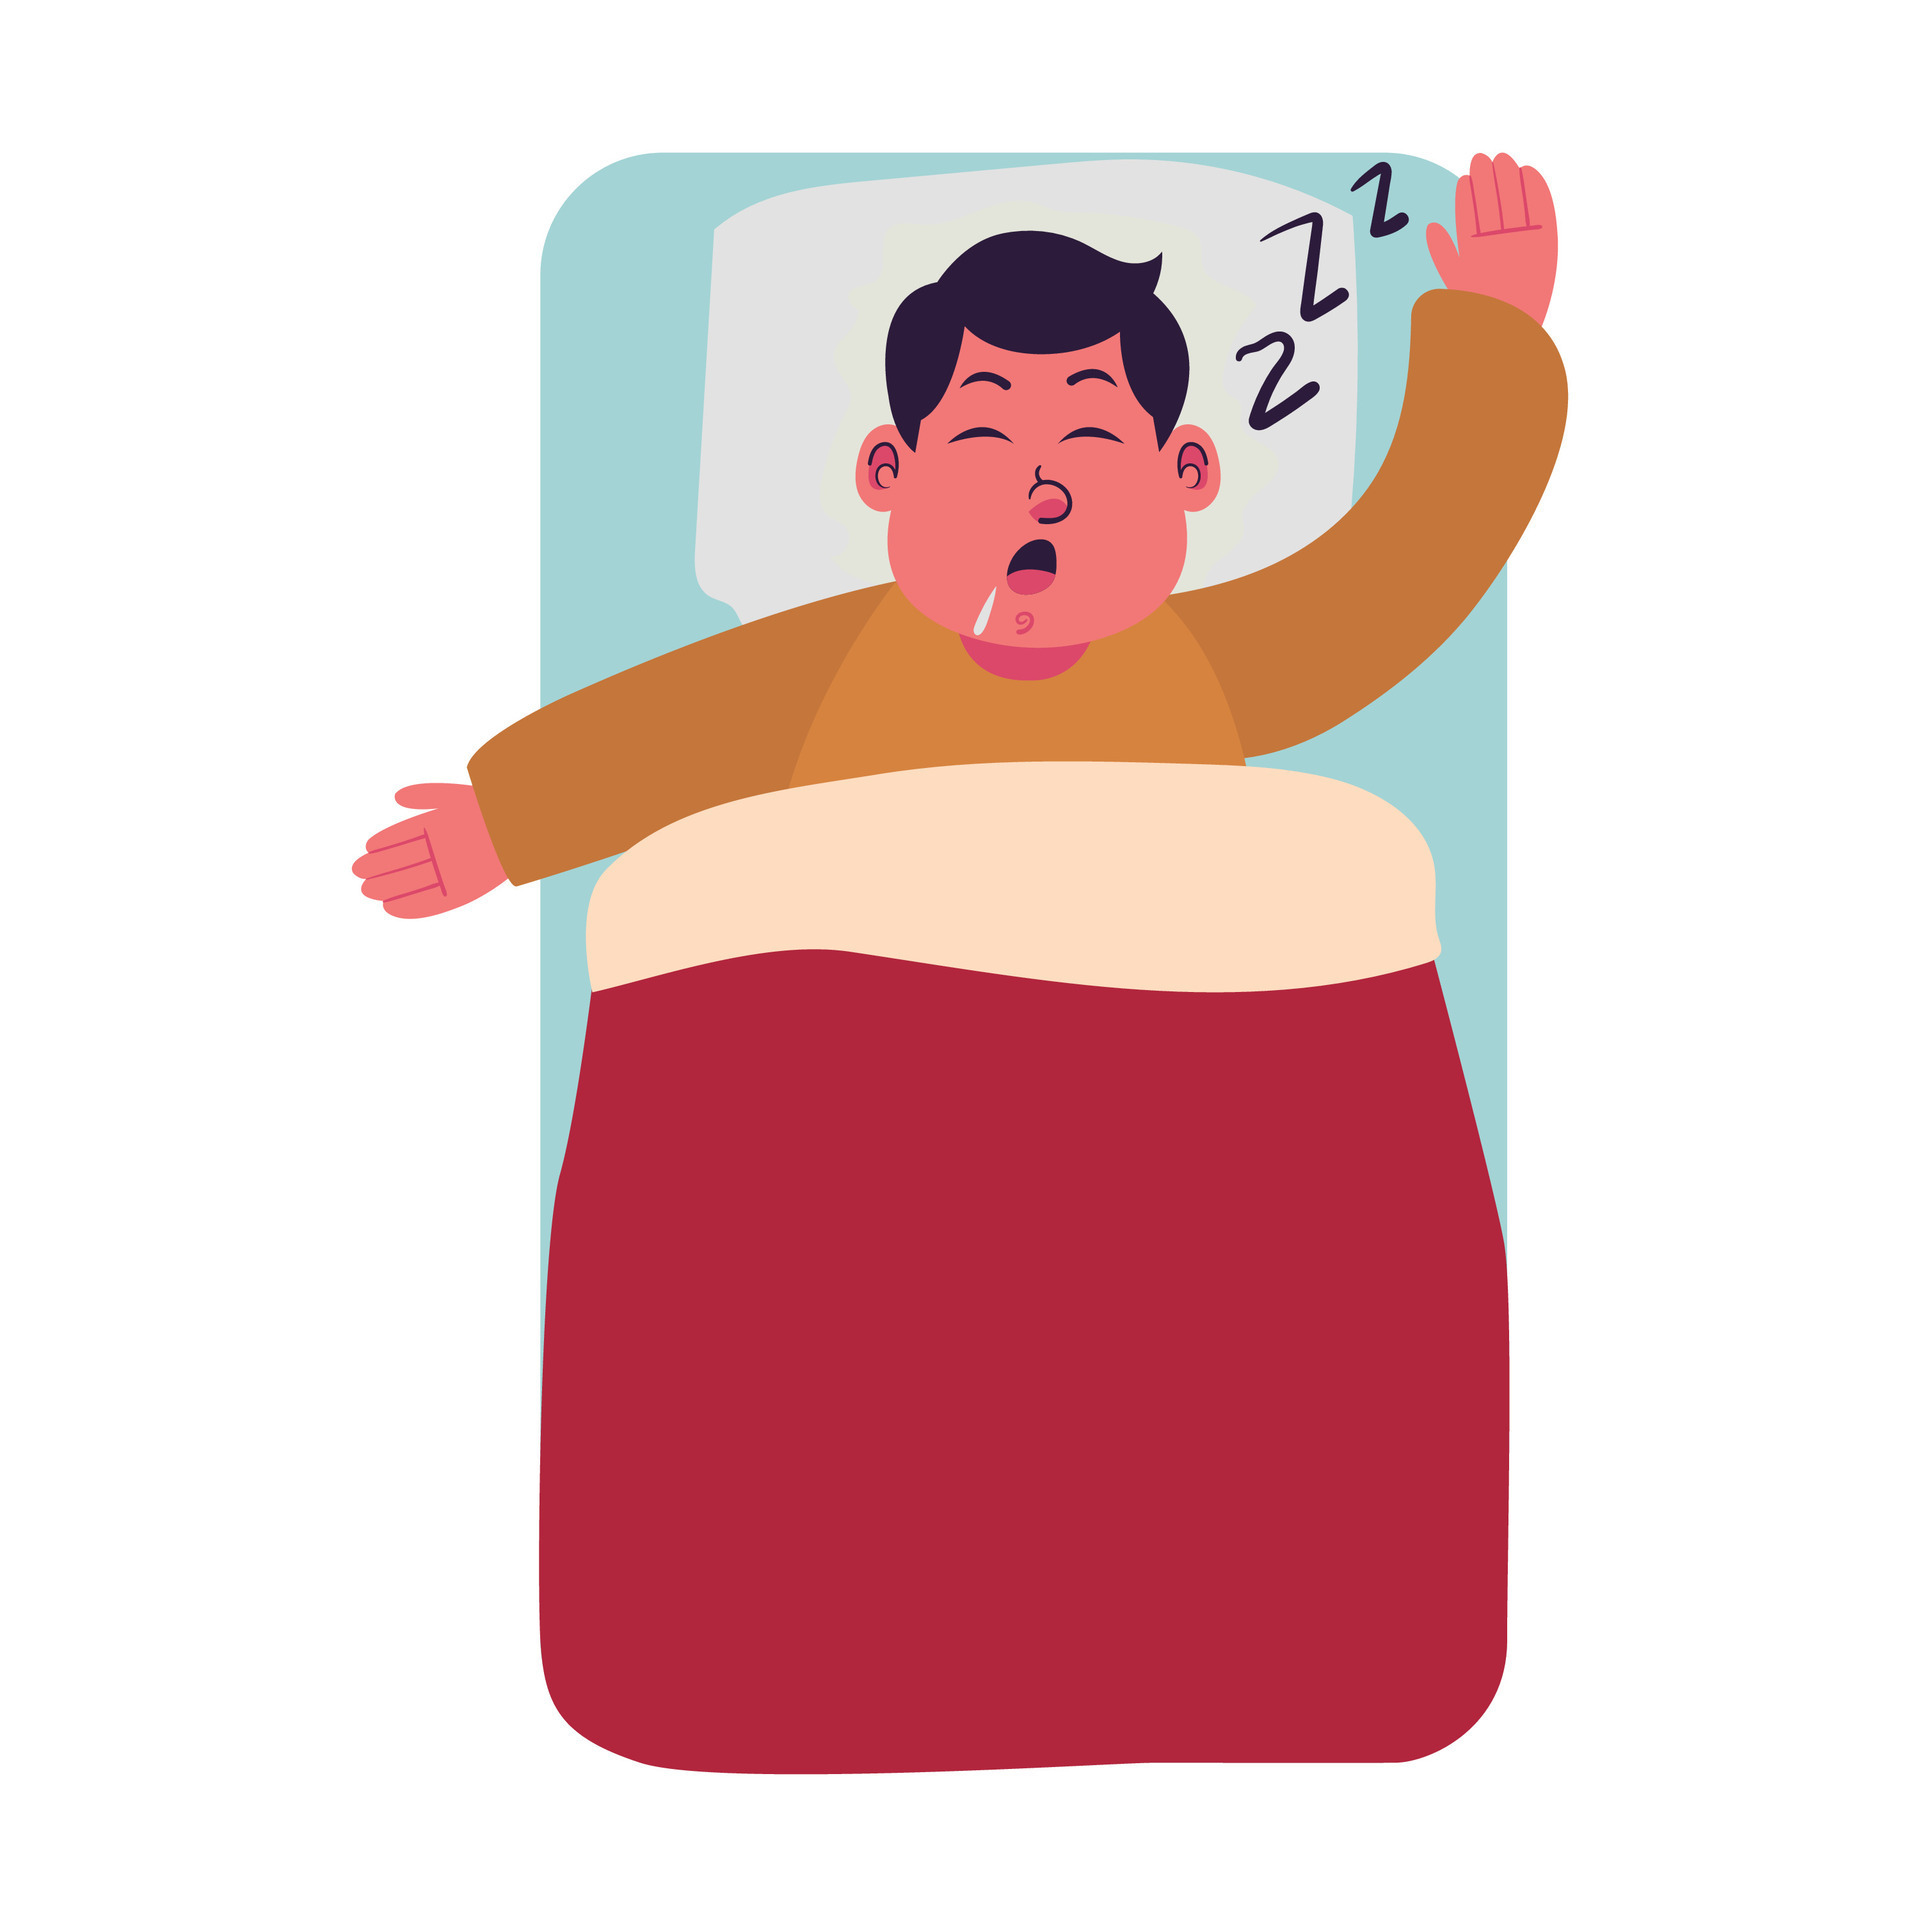 Male Fat People Overweight Plus Size Obesity Sleep And Snore